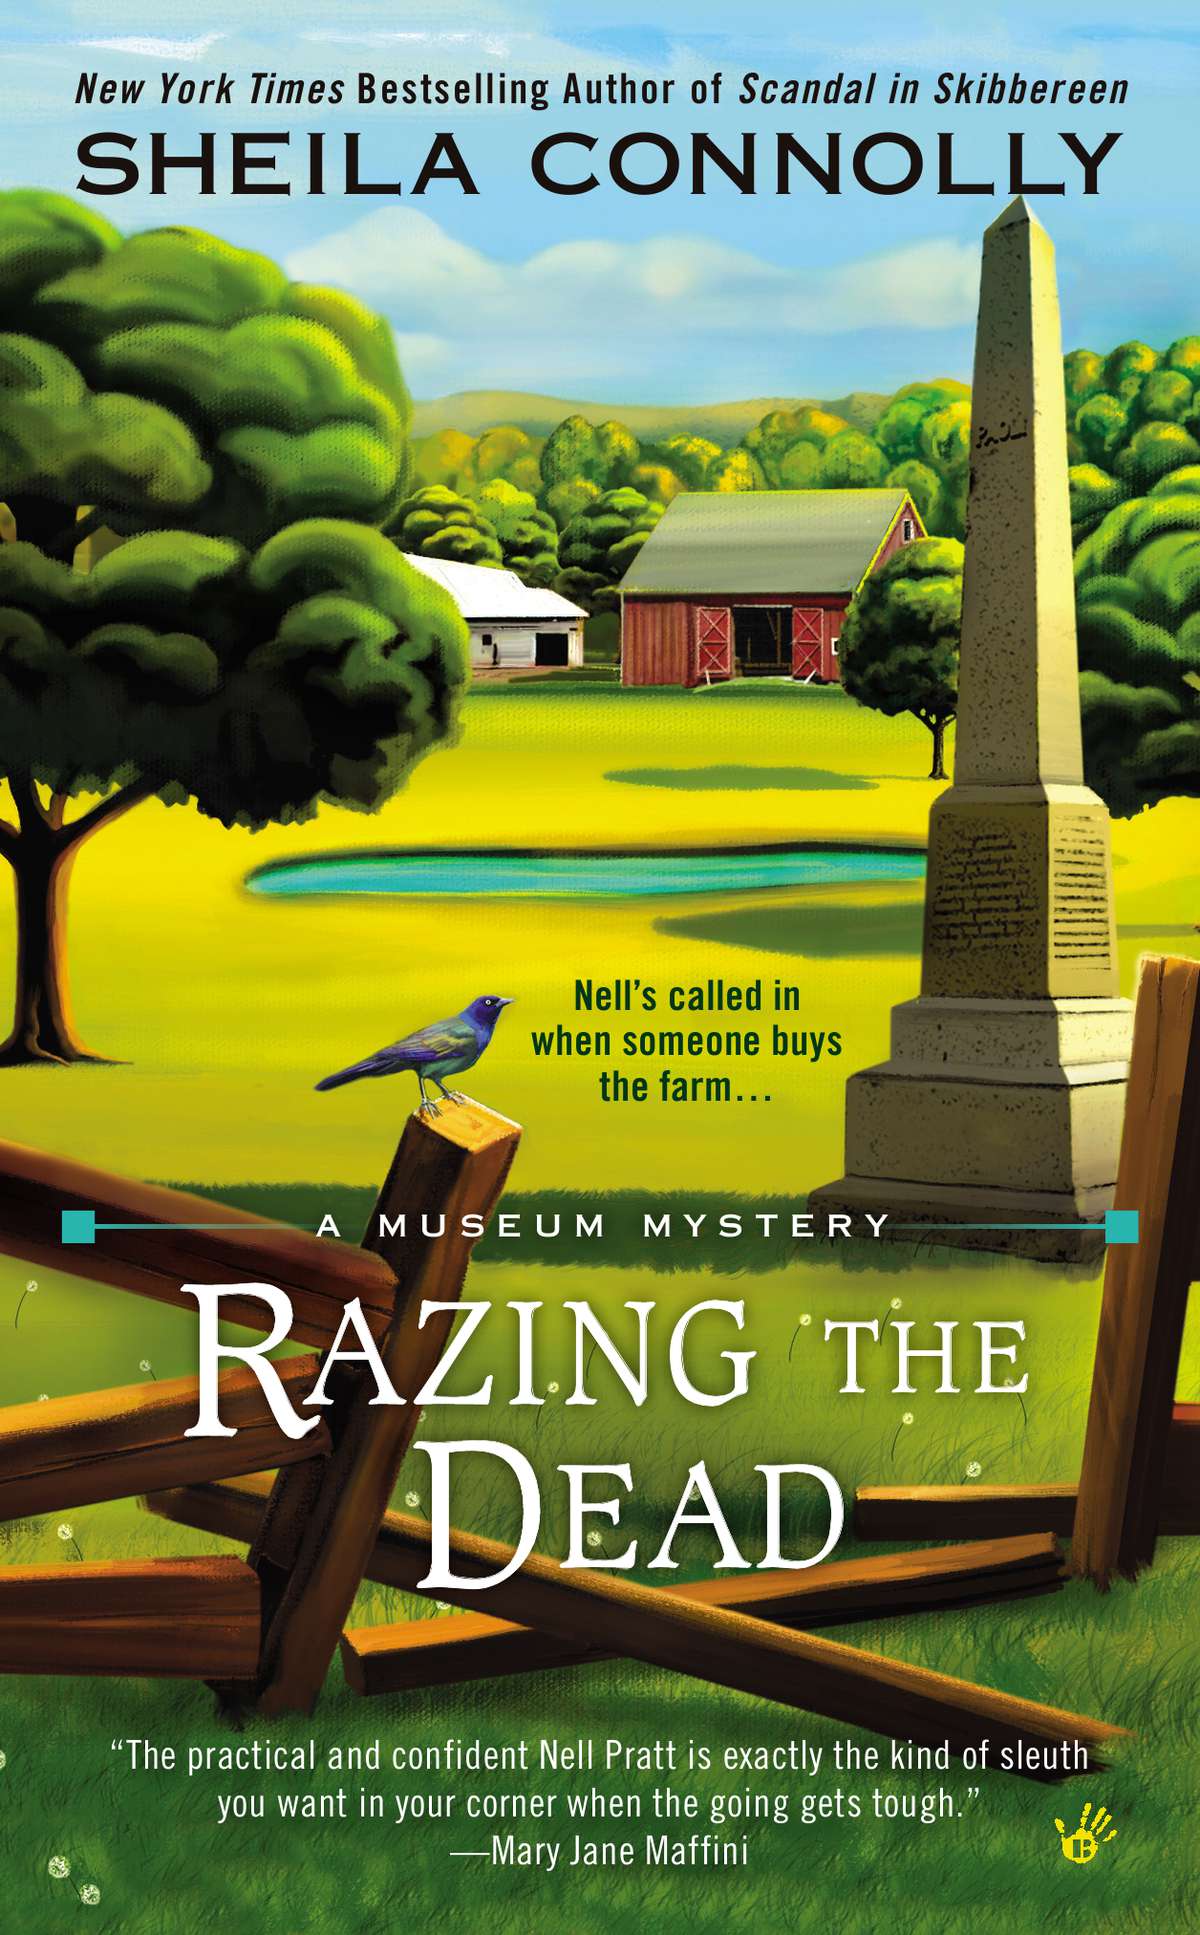 Razing the Dead (2014) by Sheila Connolly